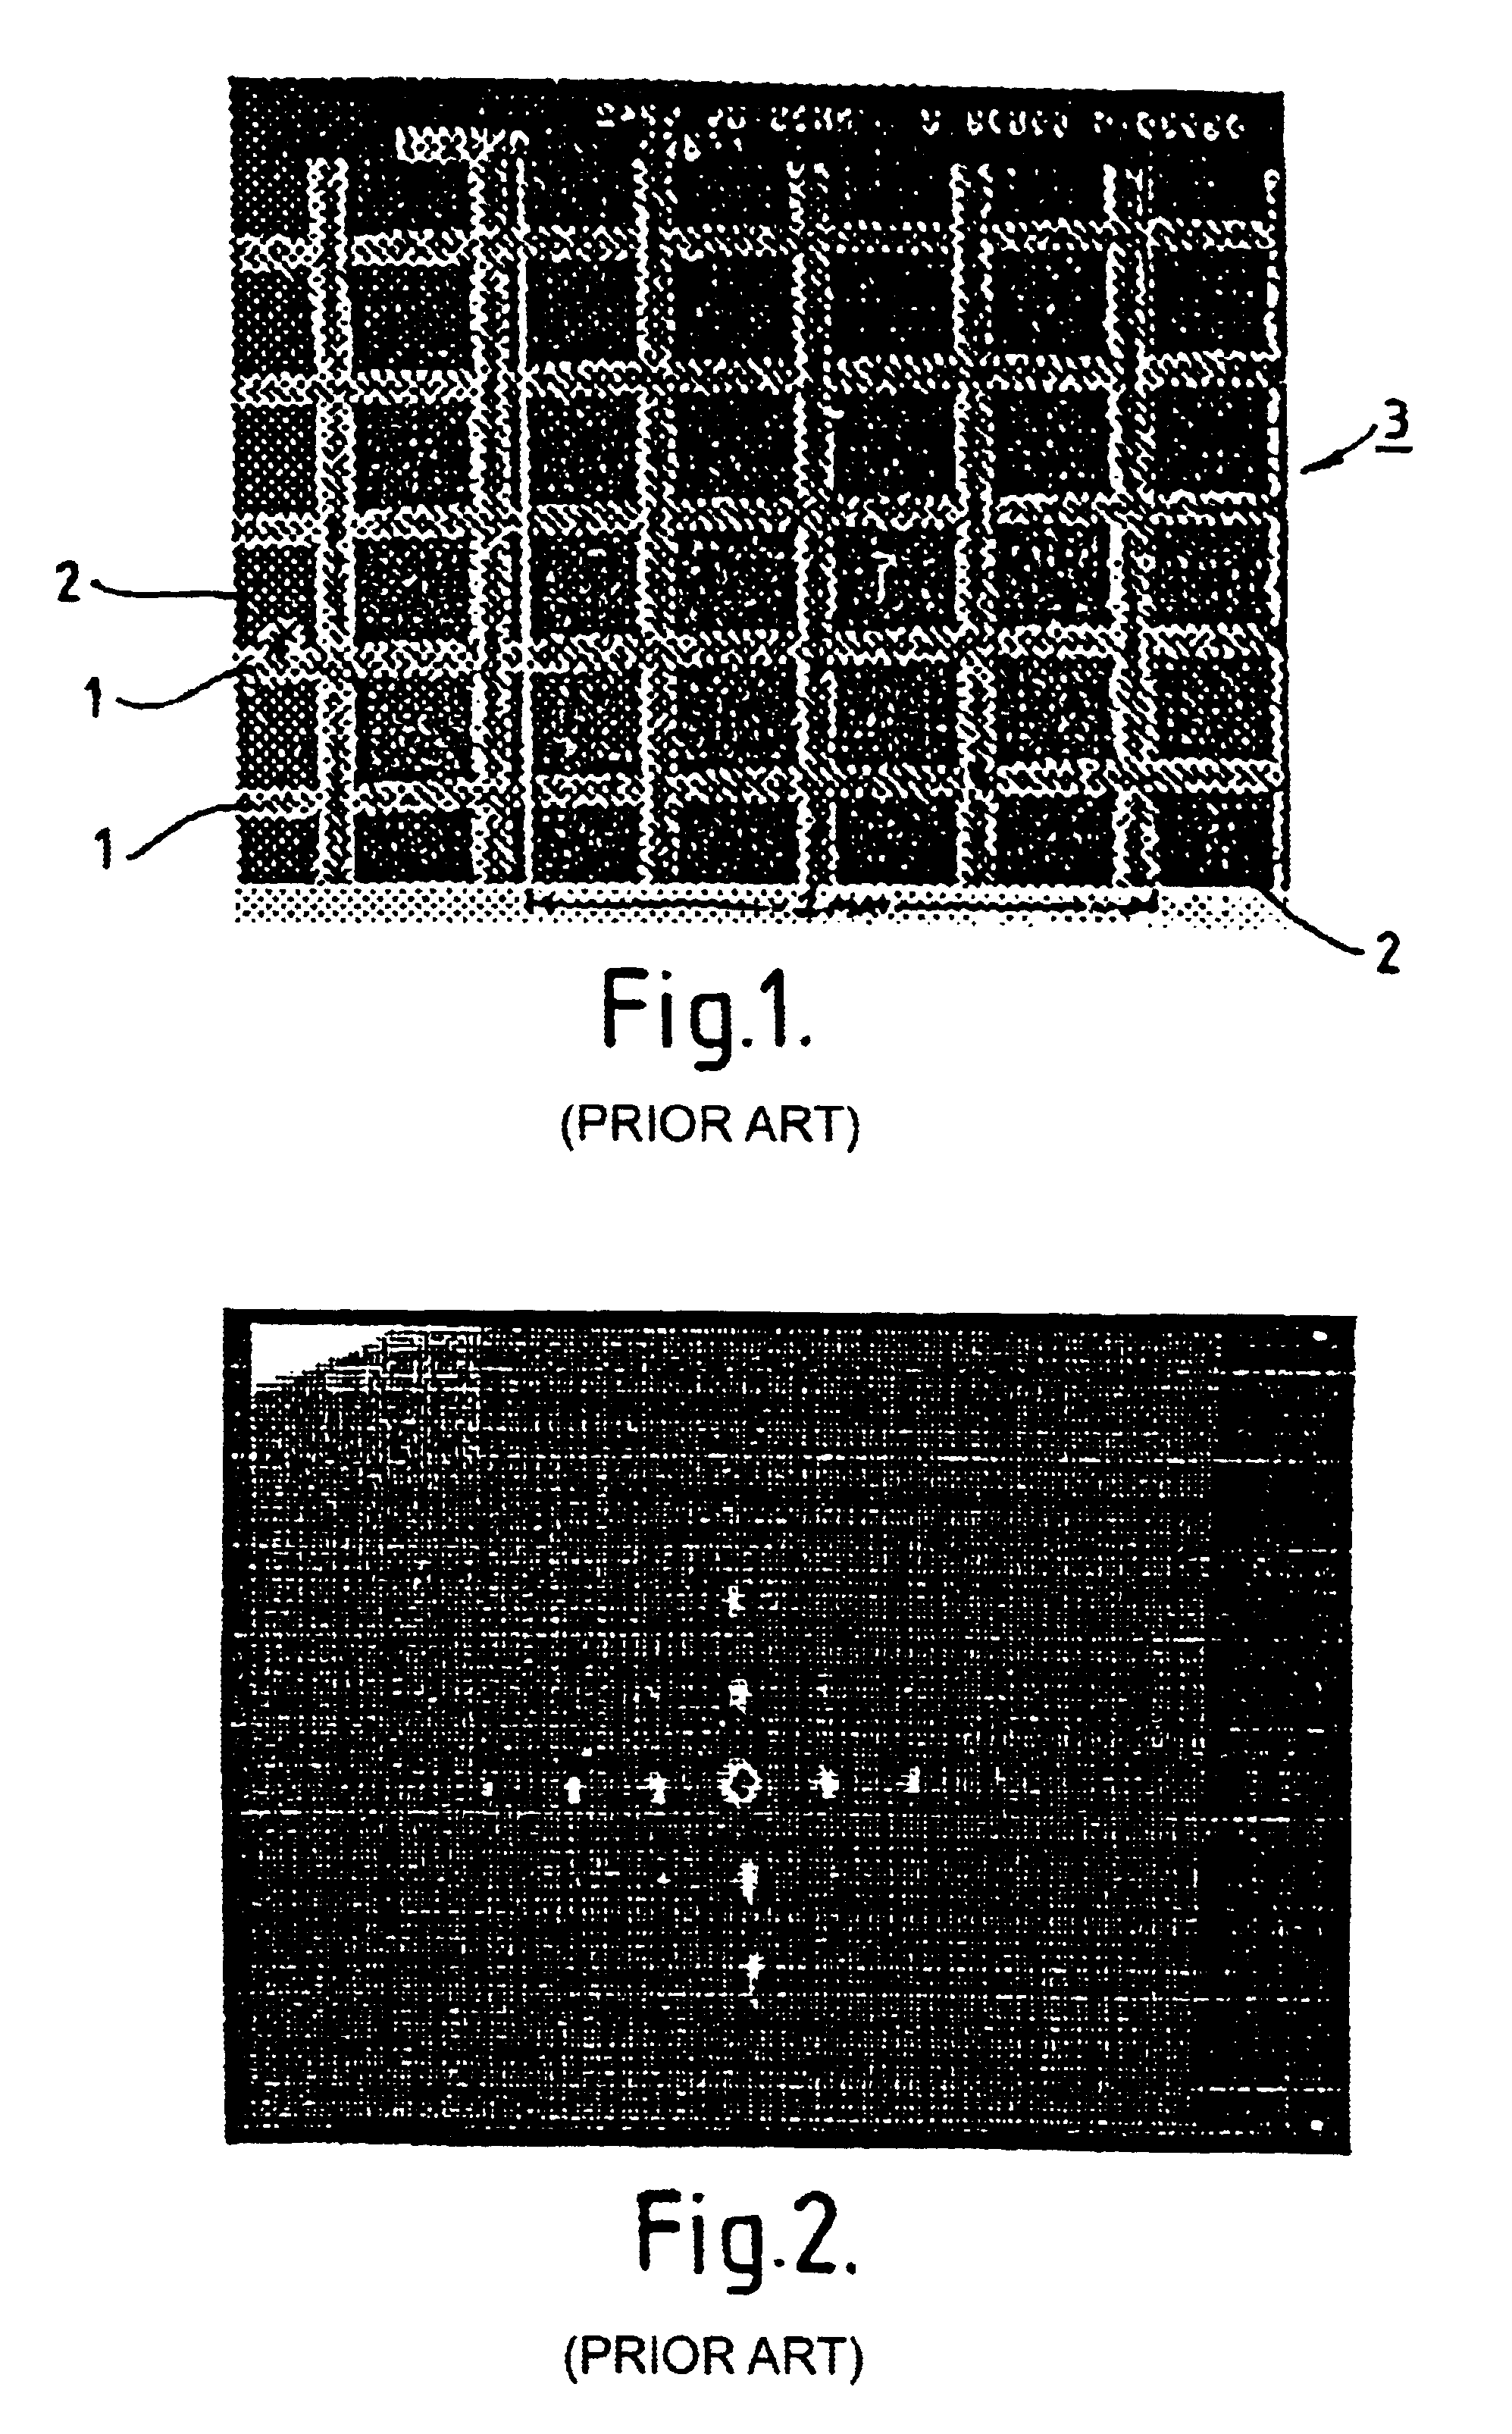 Image processing system and method for removing or compensating for diffraction spots